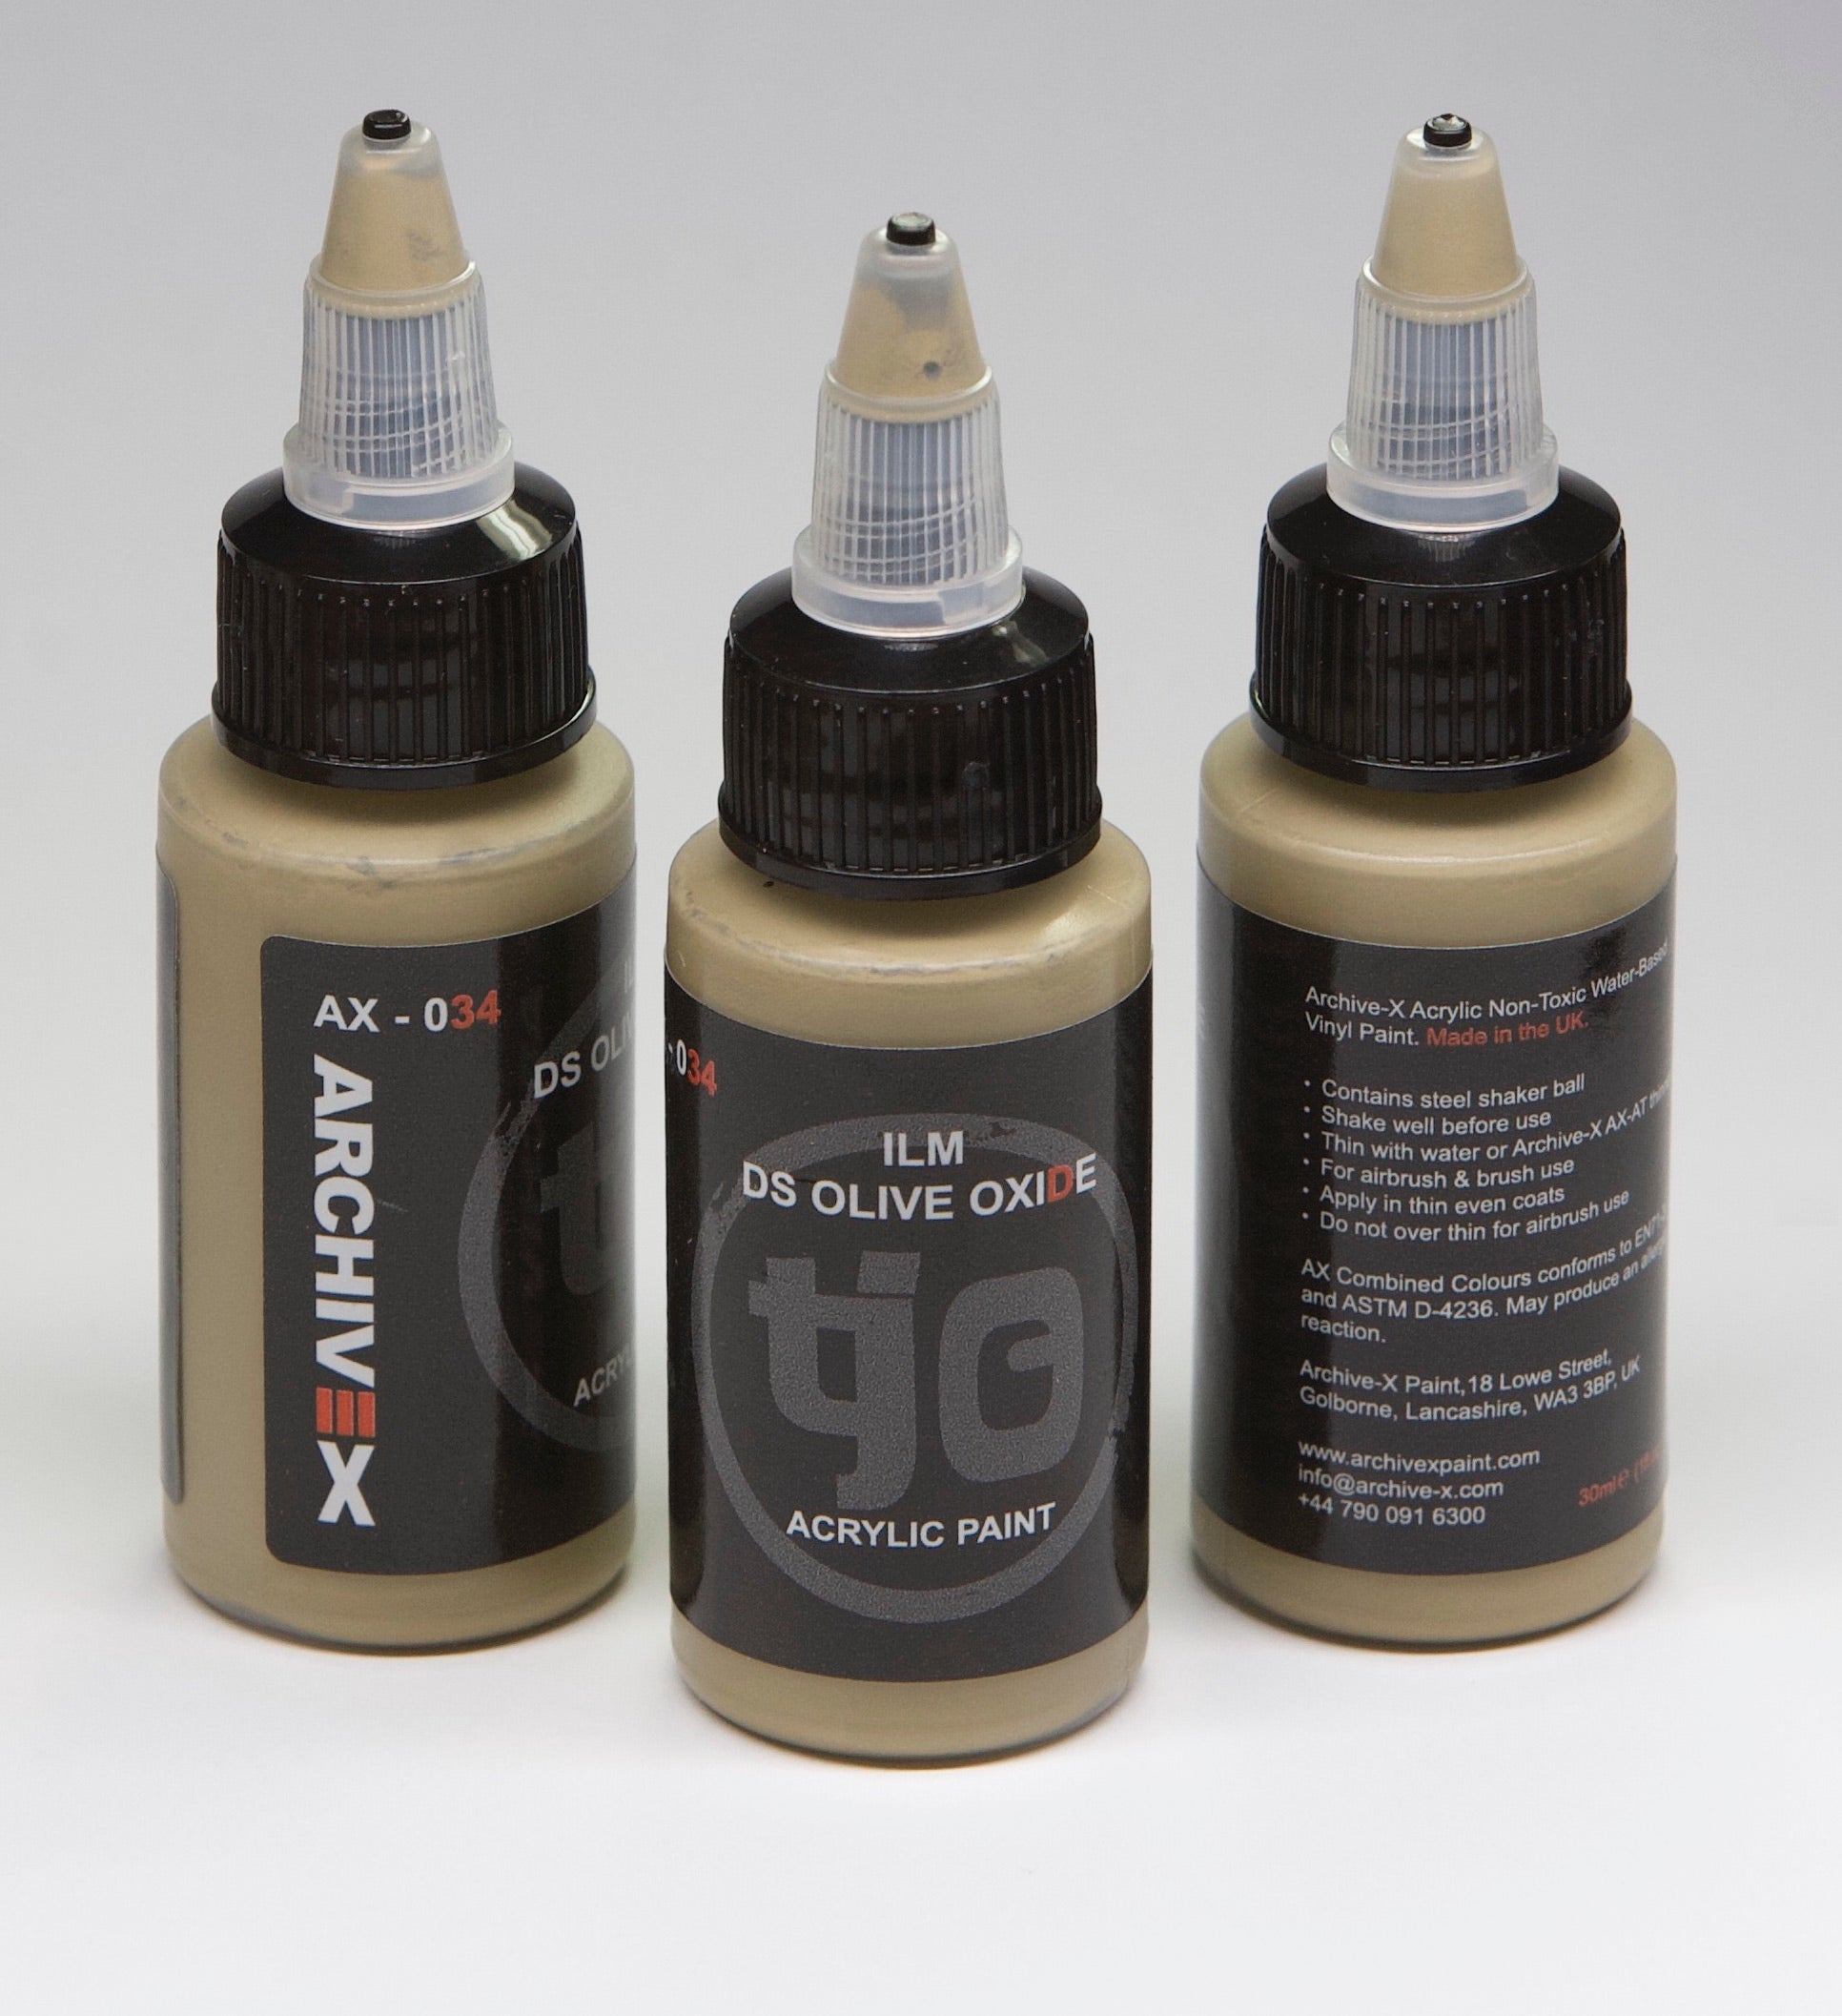 AX-034 ILM DS Olive Oxide Acrylic Paint 30ml